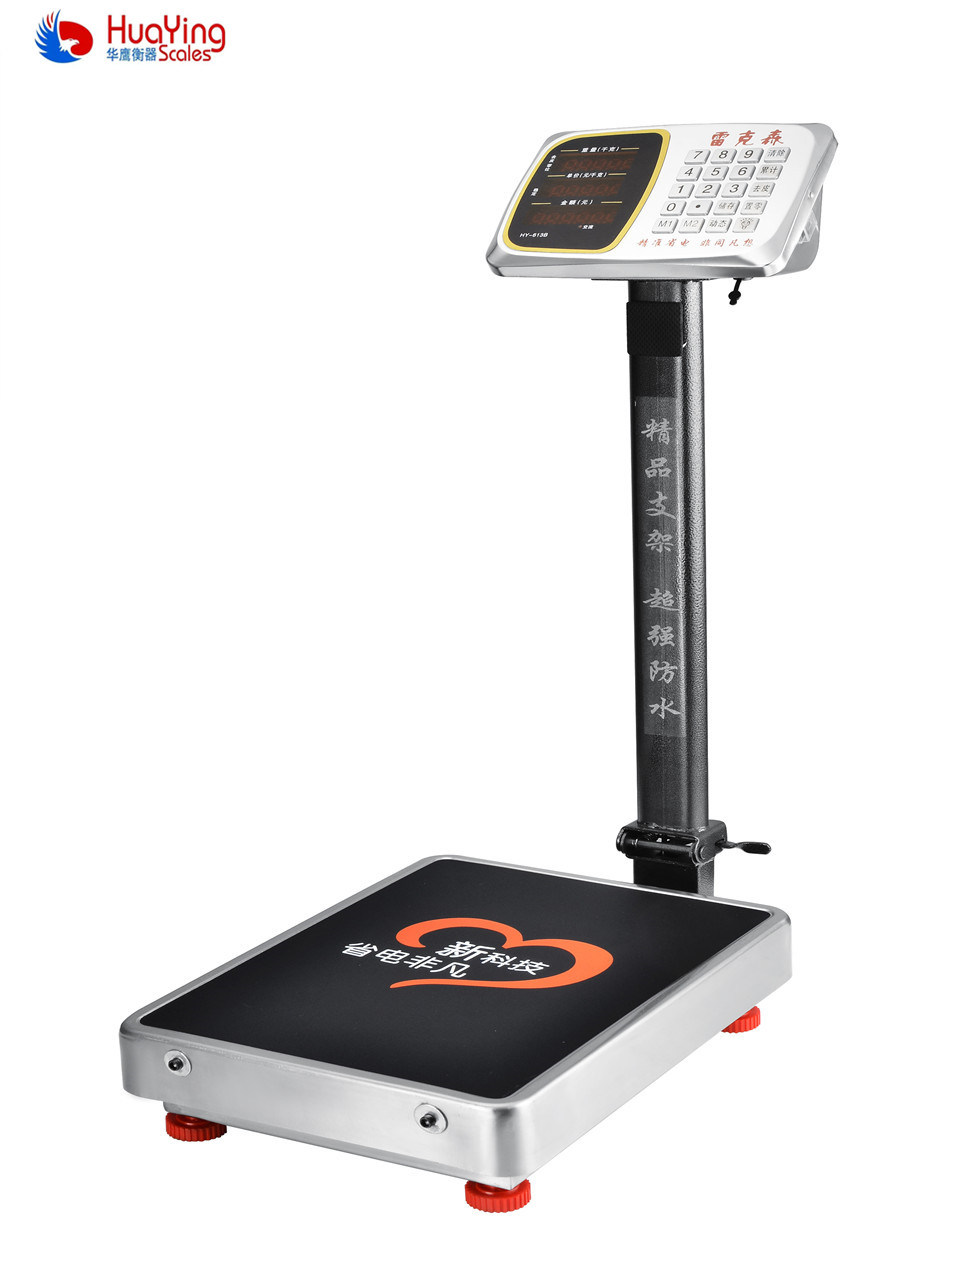 2018 Professional Chinese Supplier Industrial Digital Weighing Scales